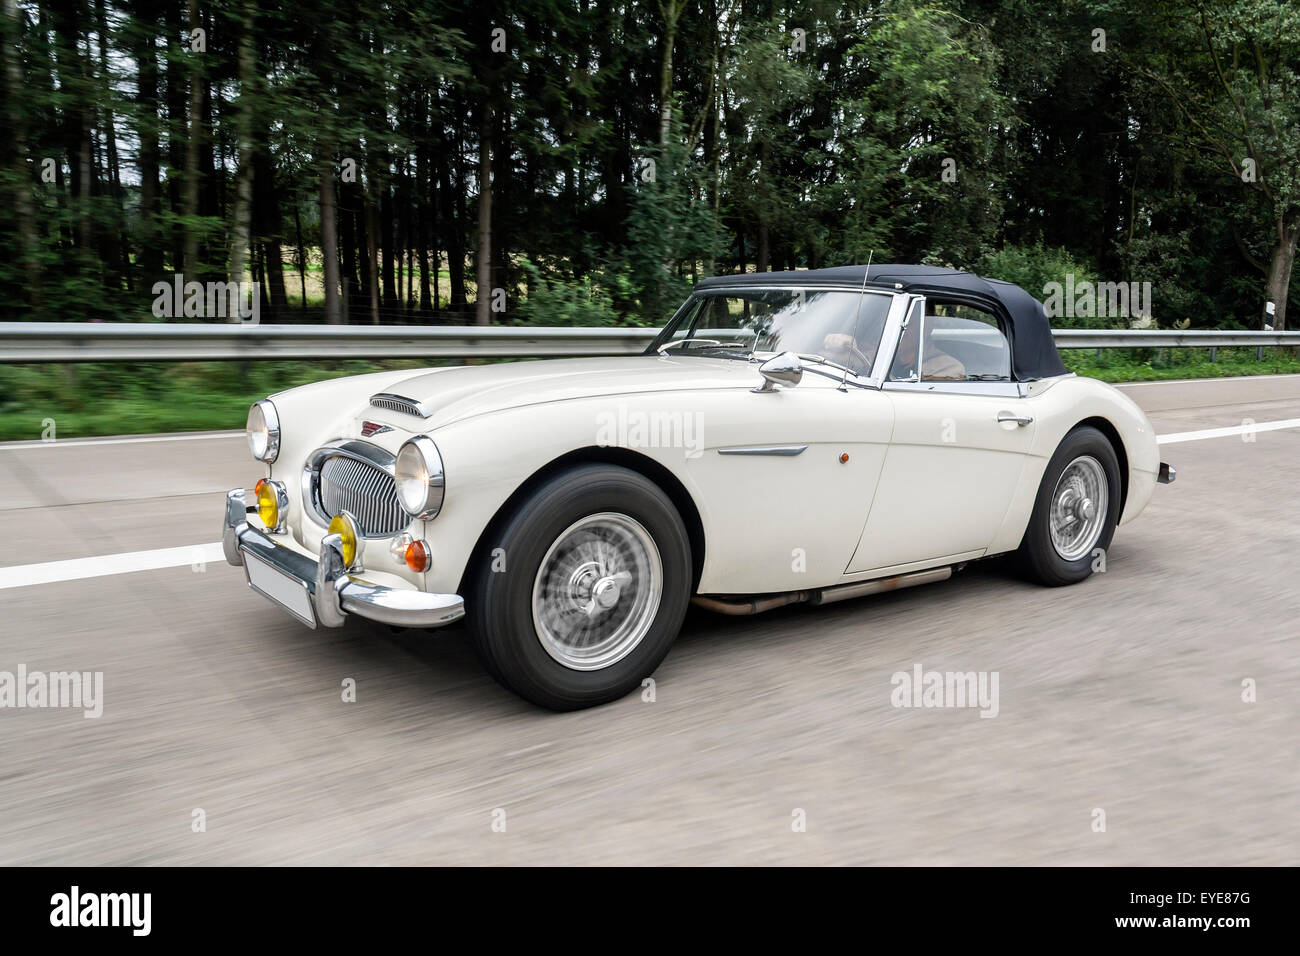 Austin-Healey 3000 at speed with its top up - No Sales on Alamy or anywhere else Stock Photo